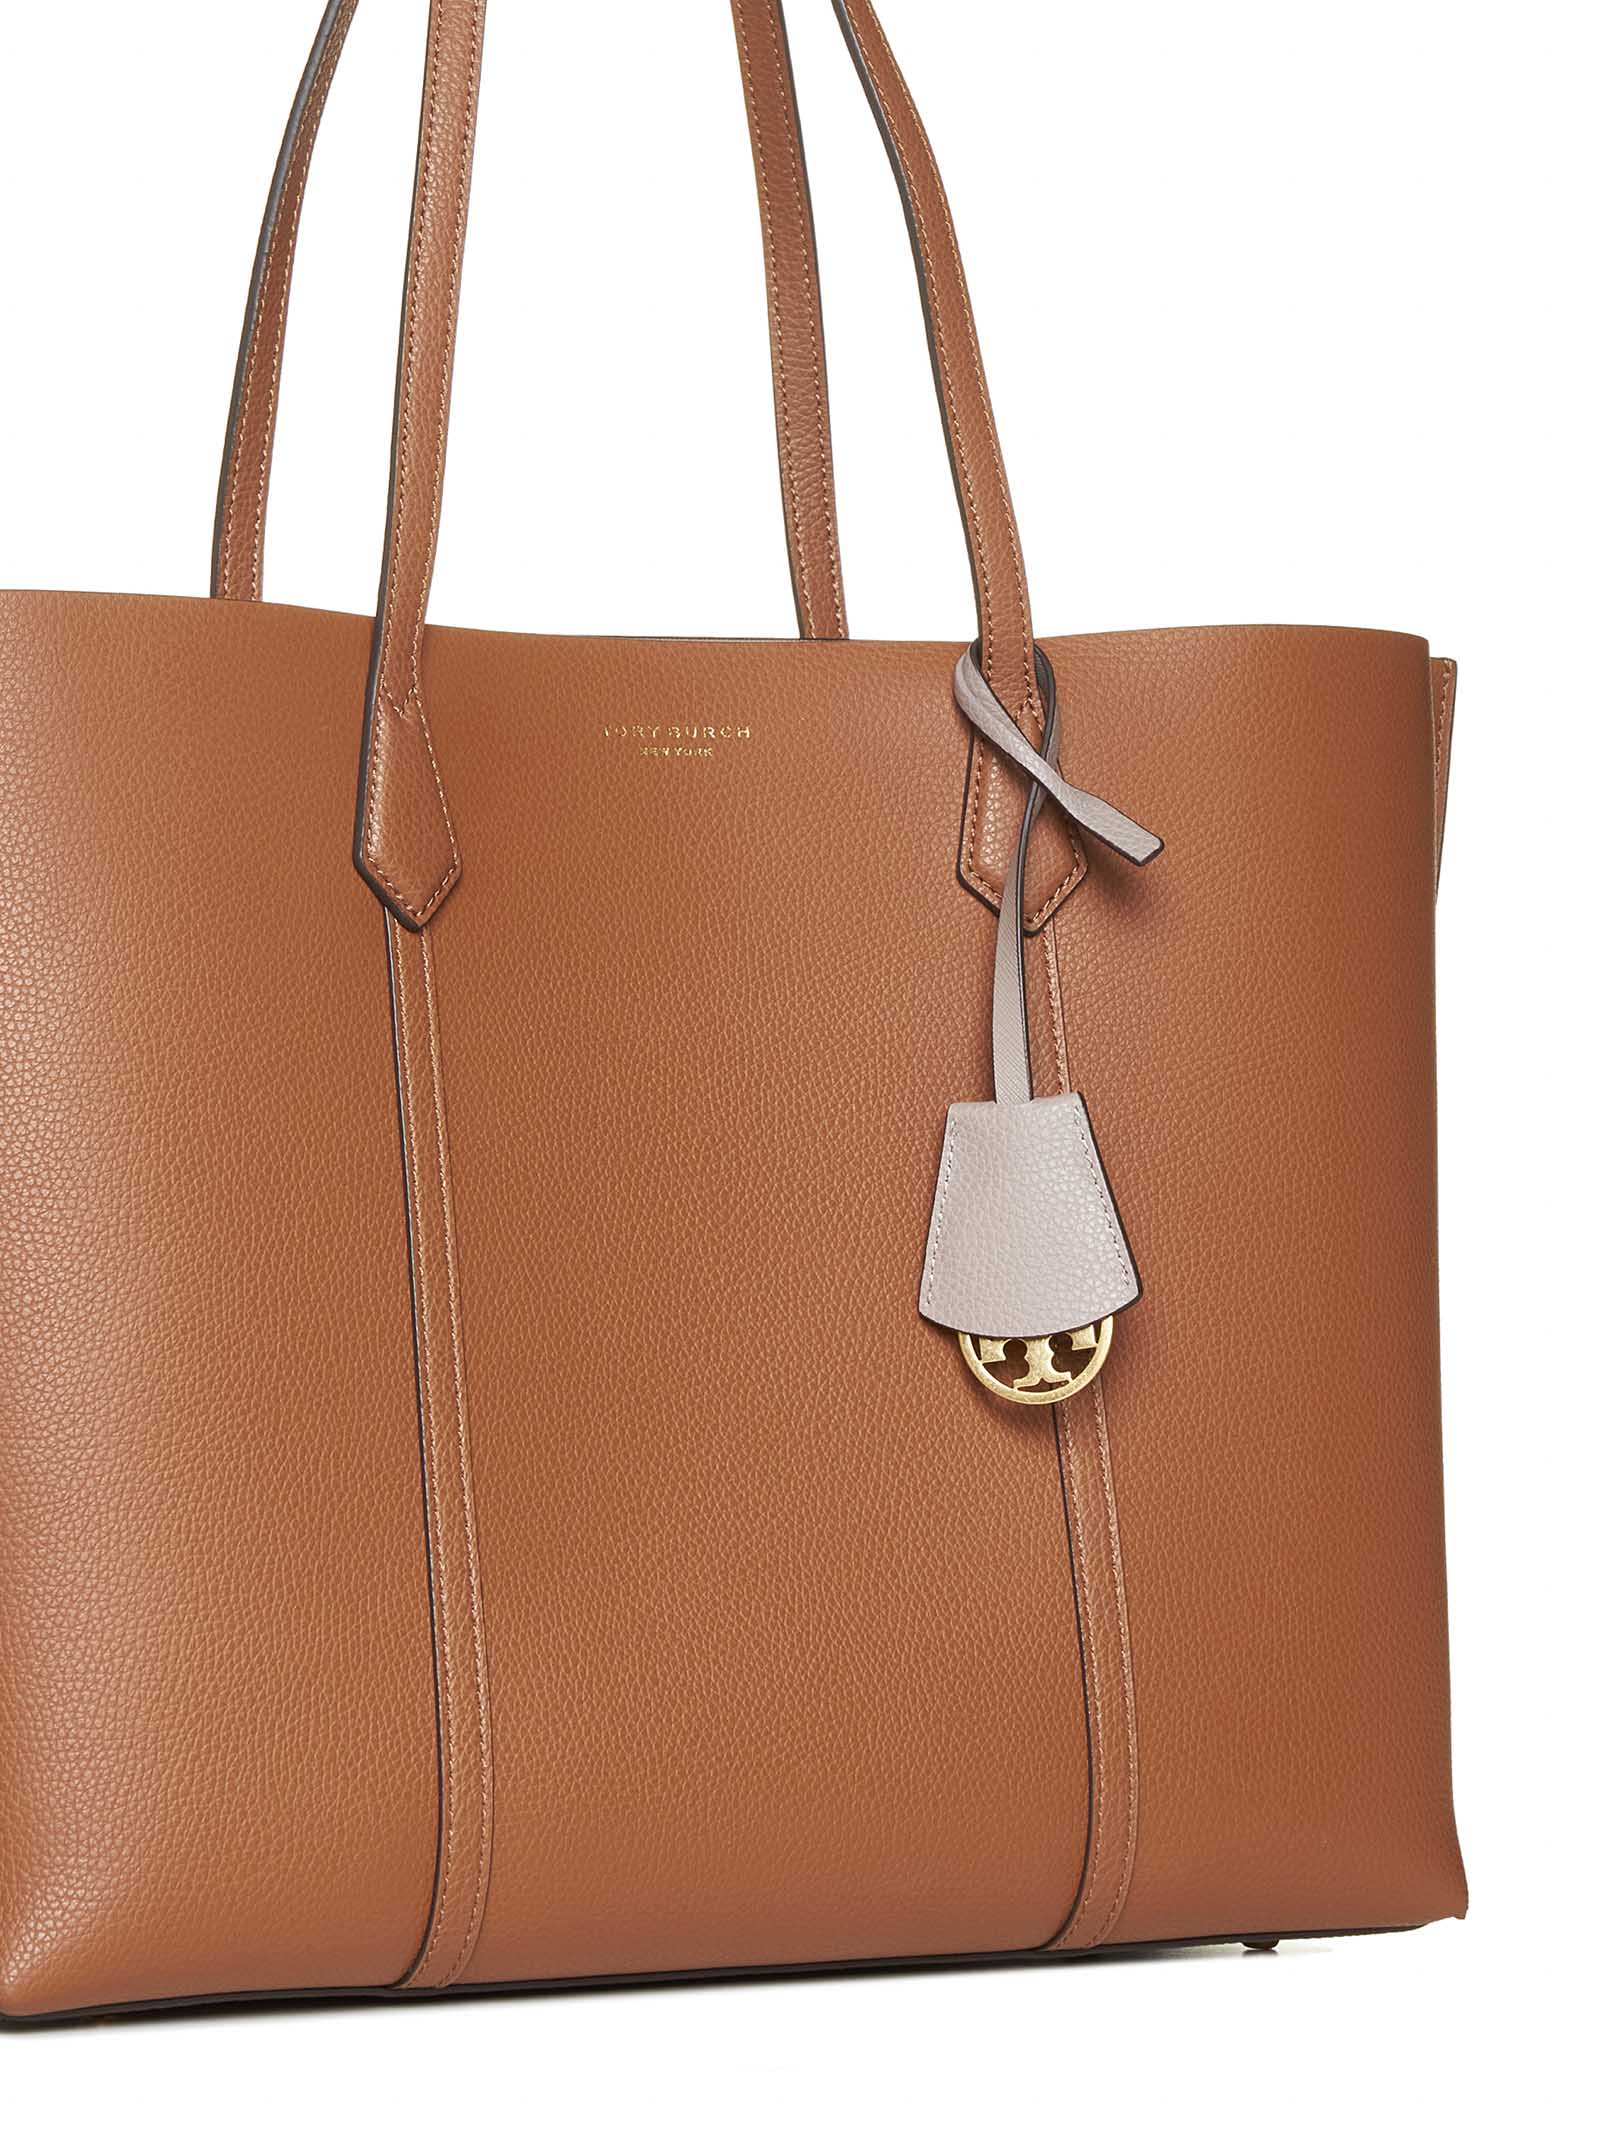 Shop Tory Burch Tote In Light Umber